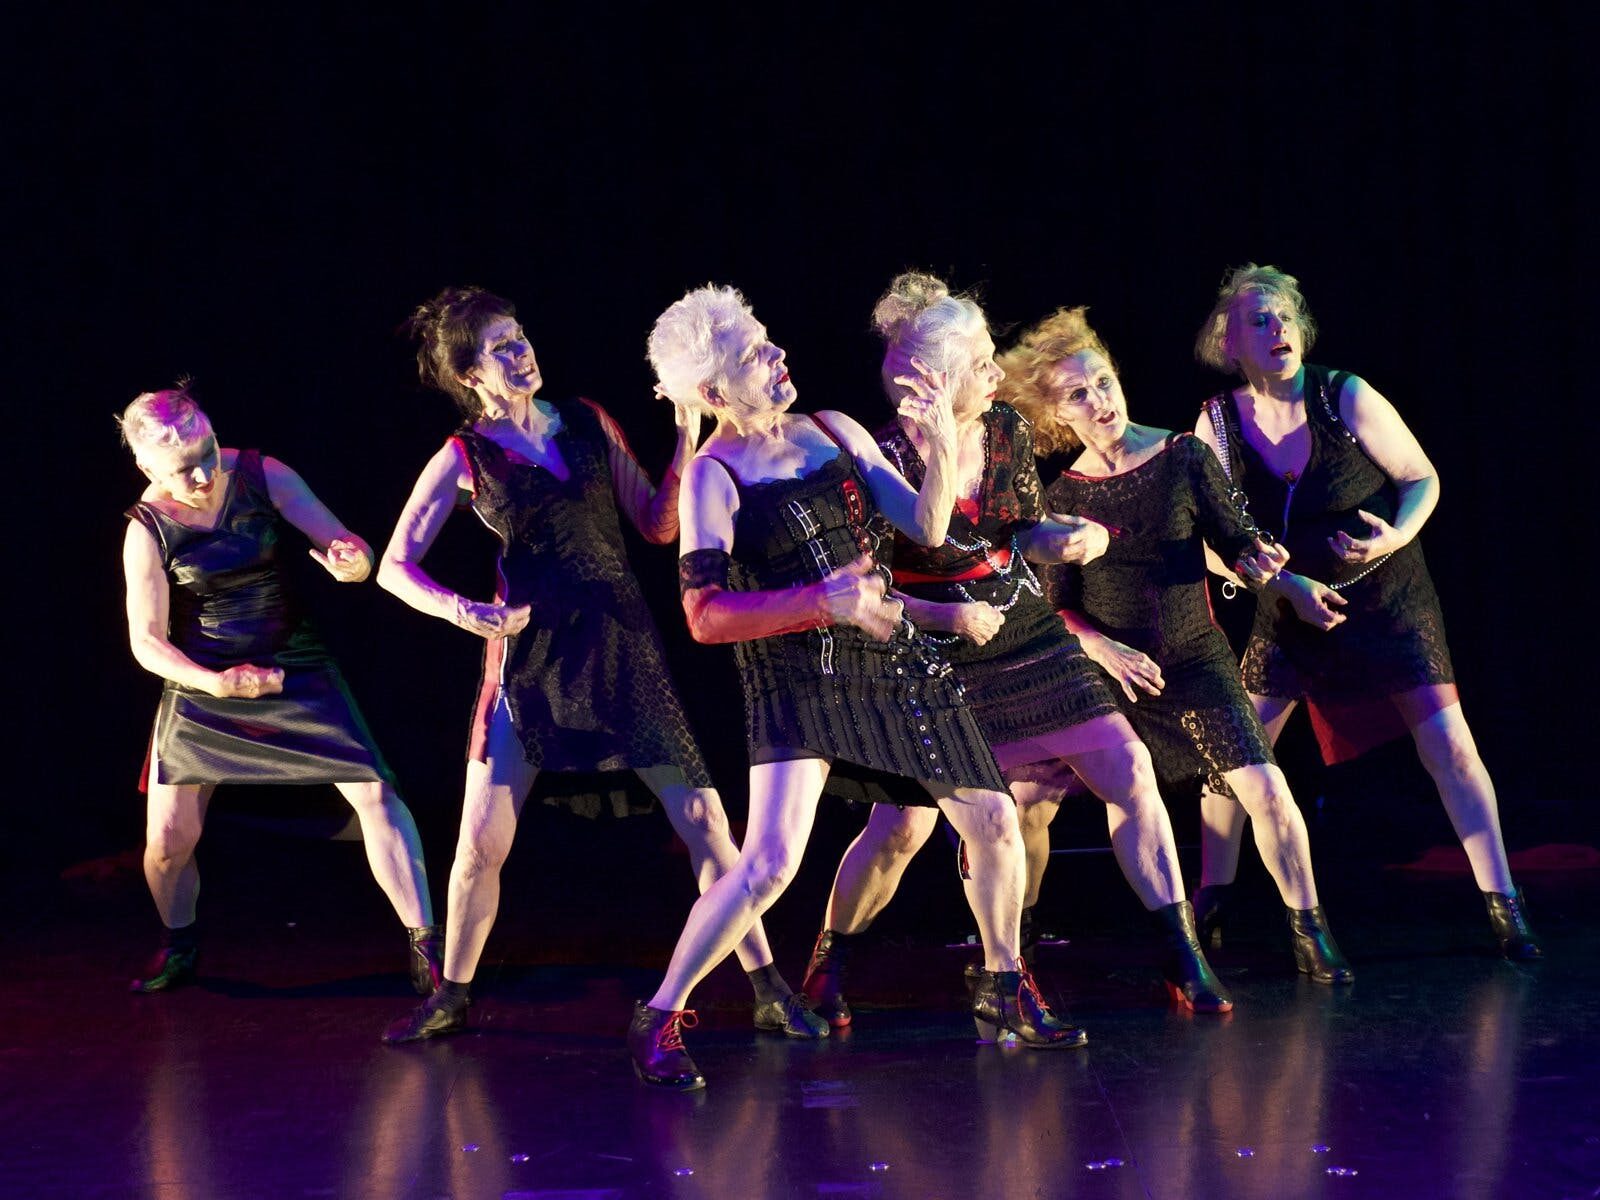 Six older women dressed in goth attire stand together, legs apart and leaning backwards